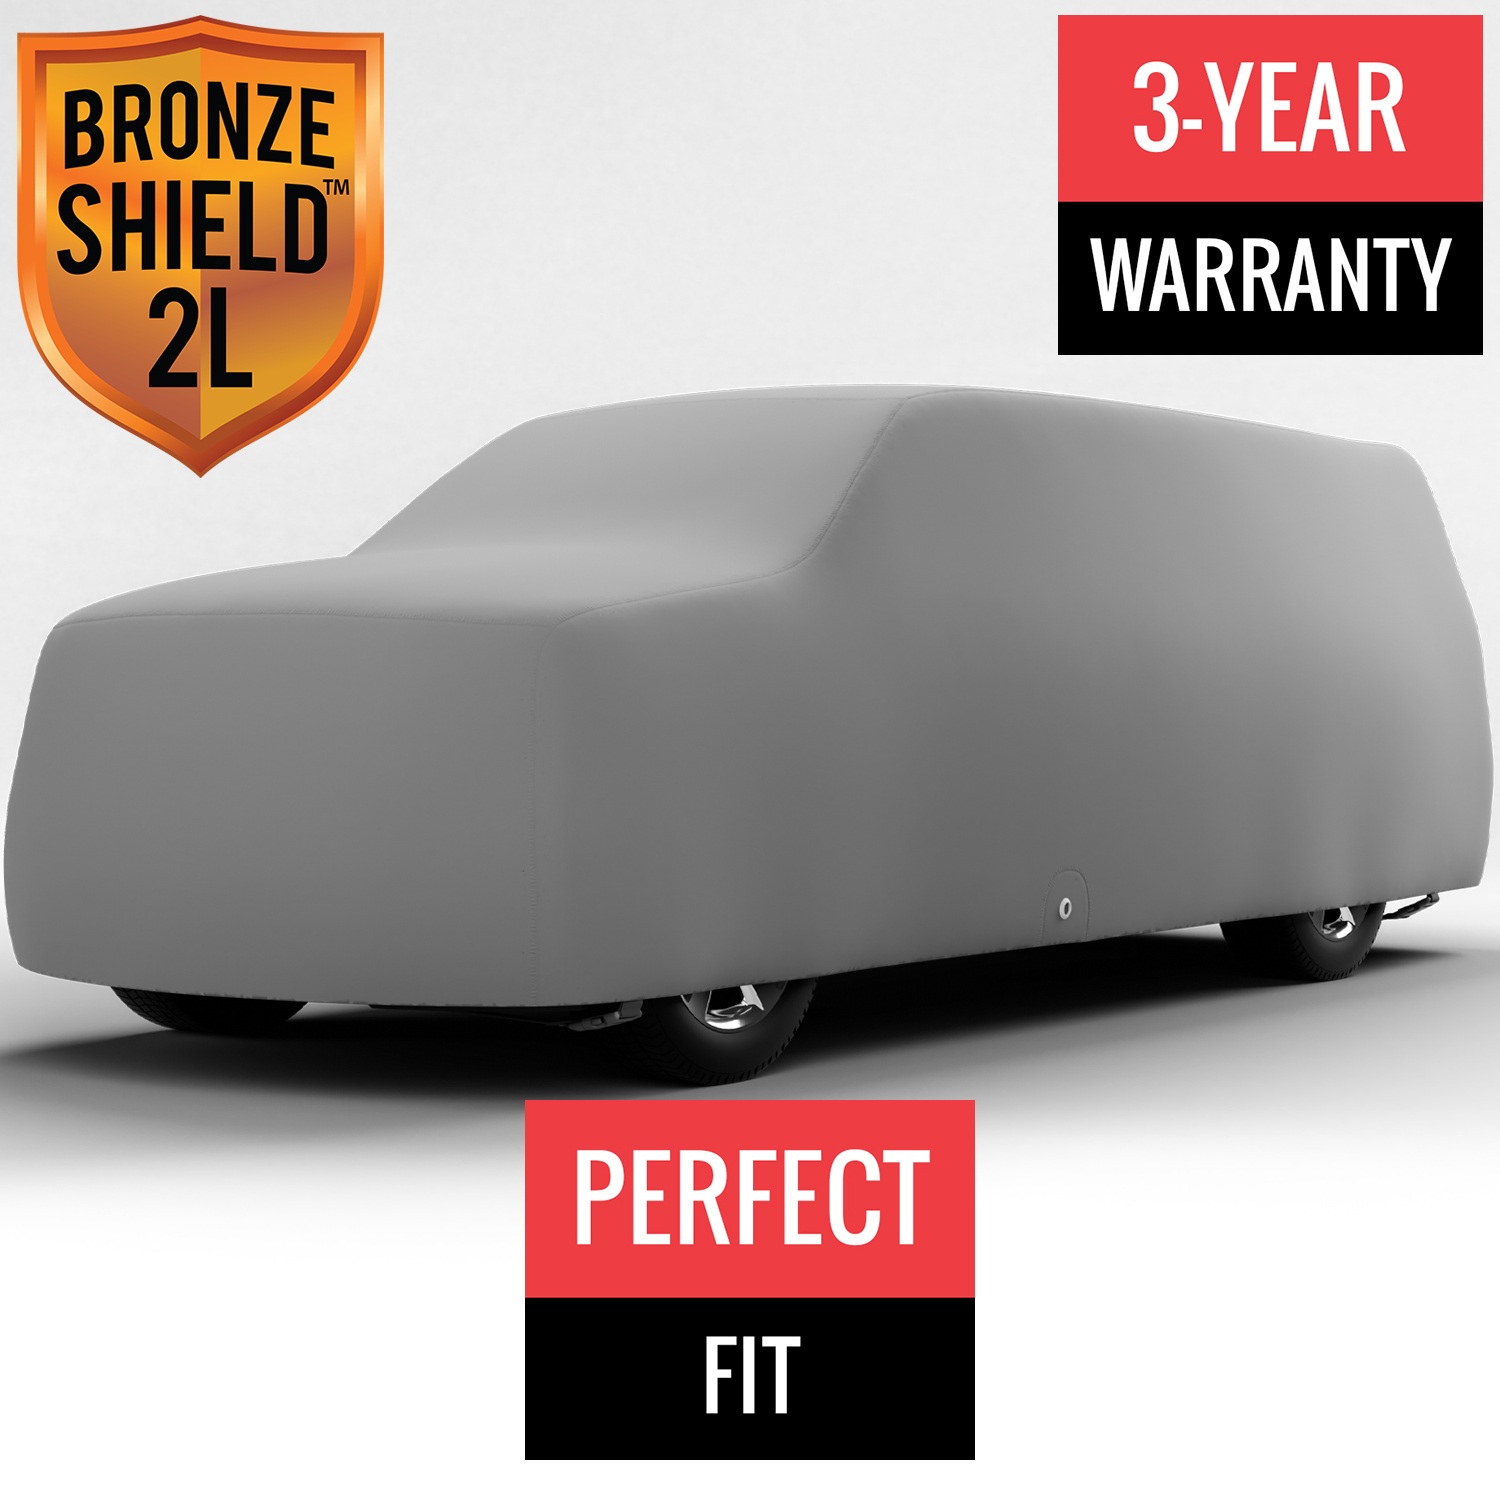 Bronze Shield 2L - Car Cover for Ford F-150 2015 SuperCrew Pickup 5.5 Feet Bed with Camper Shell